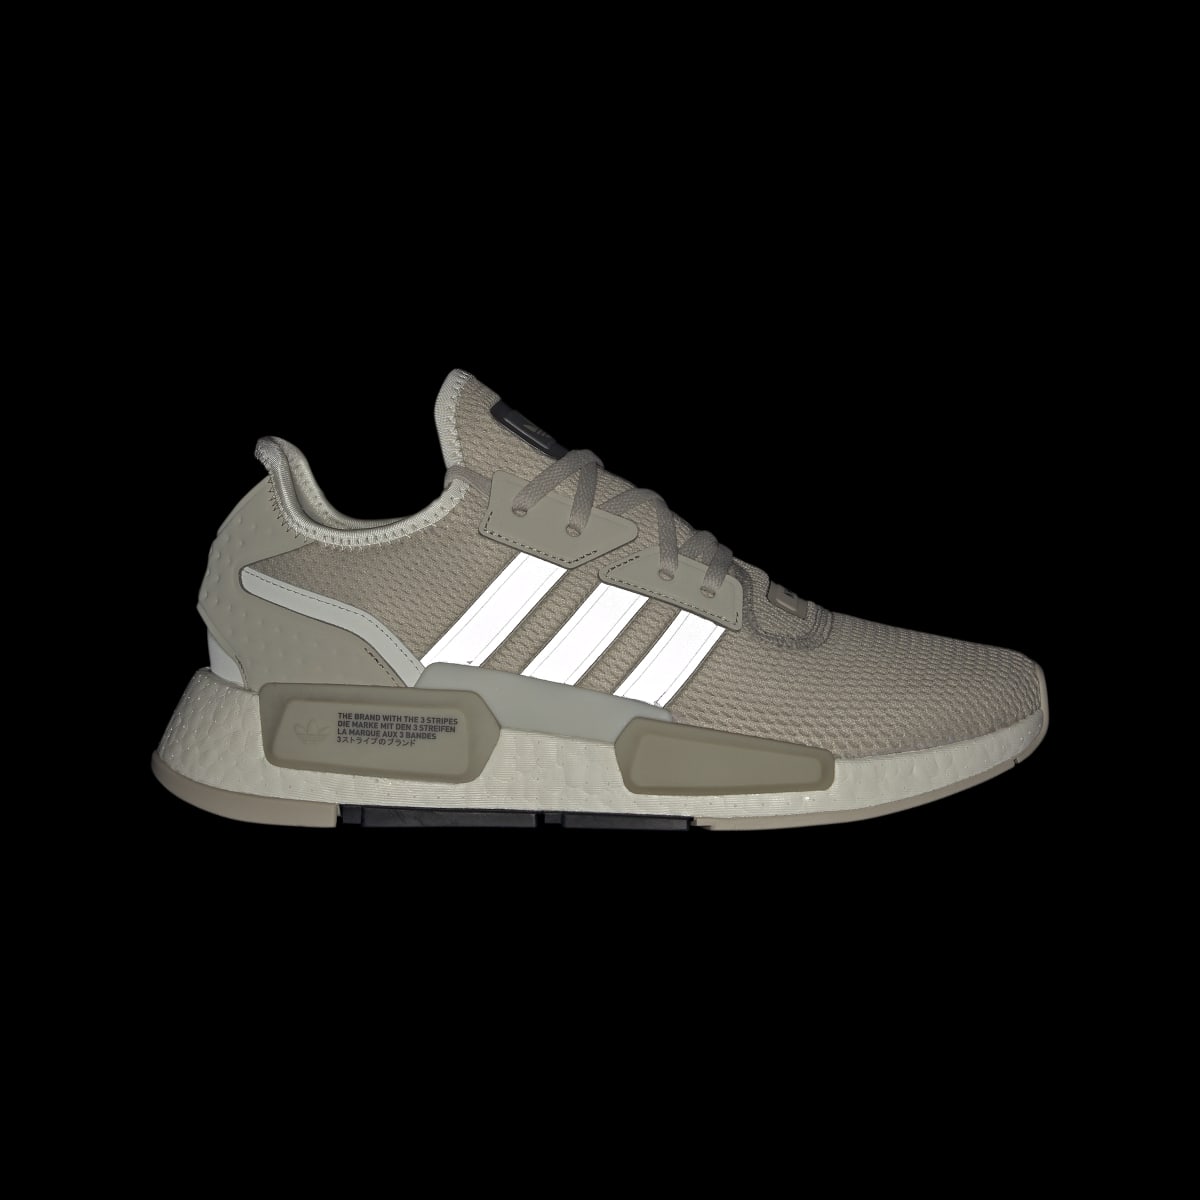 Adidas NMD_G1 Shoes. 4